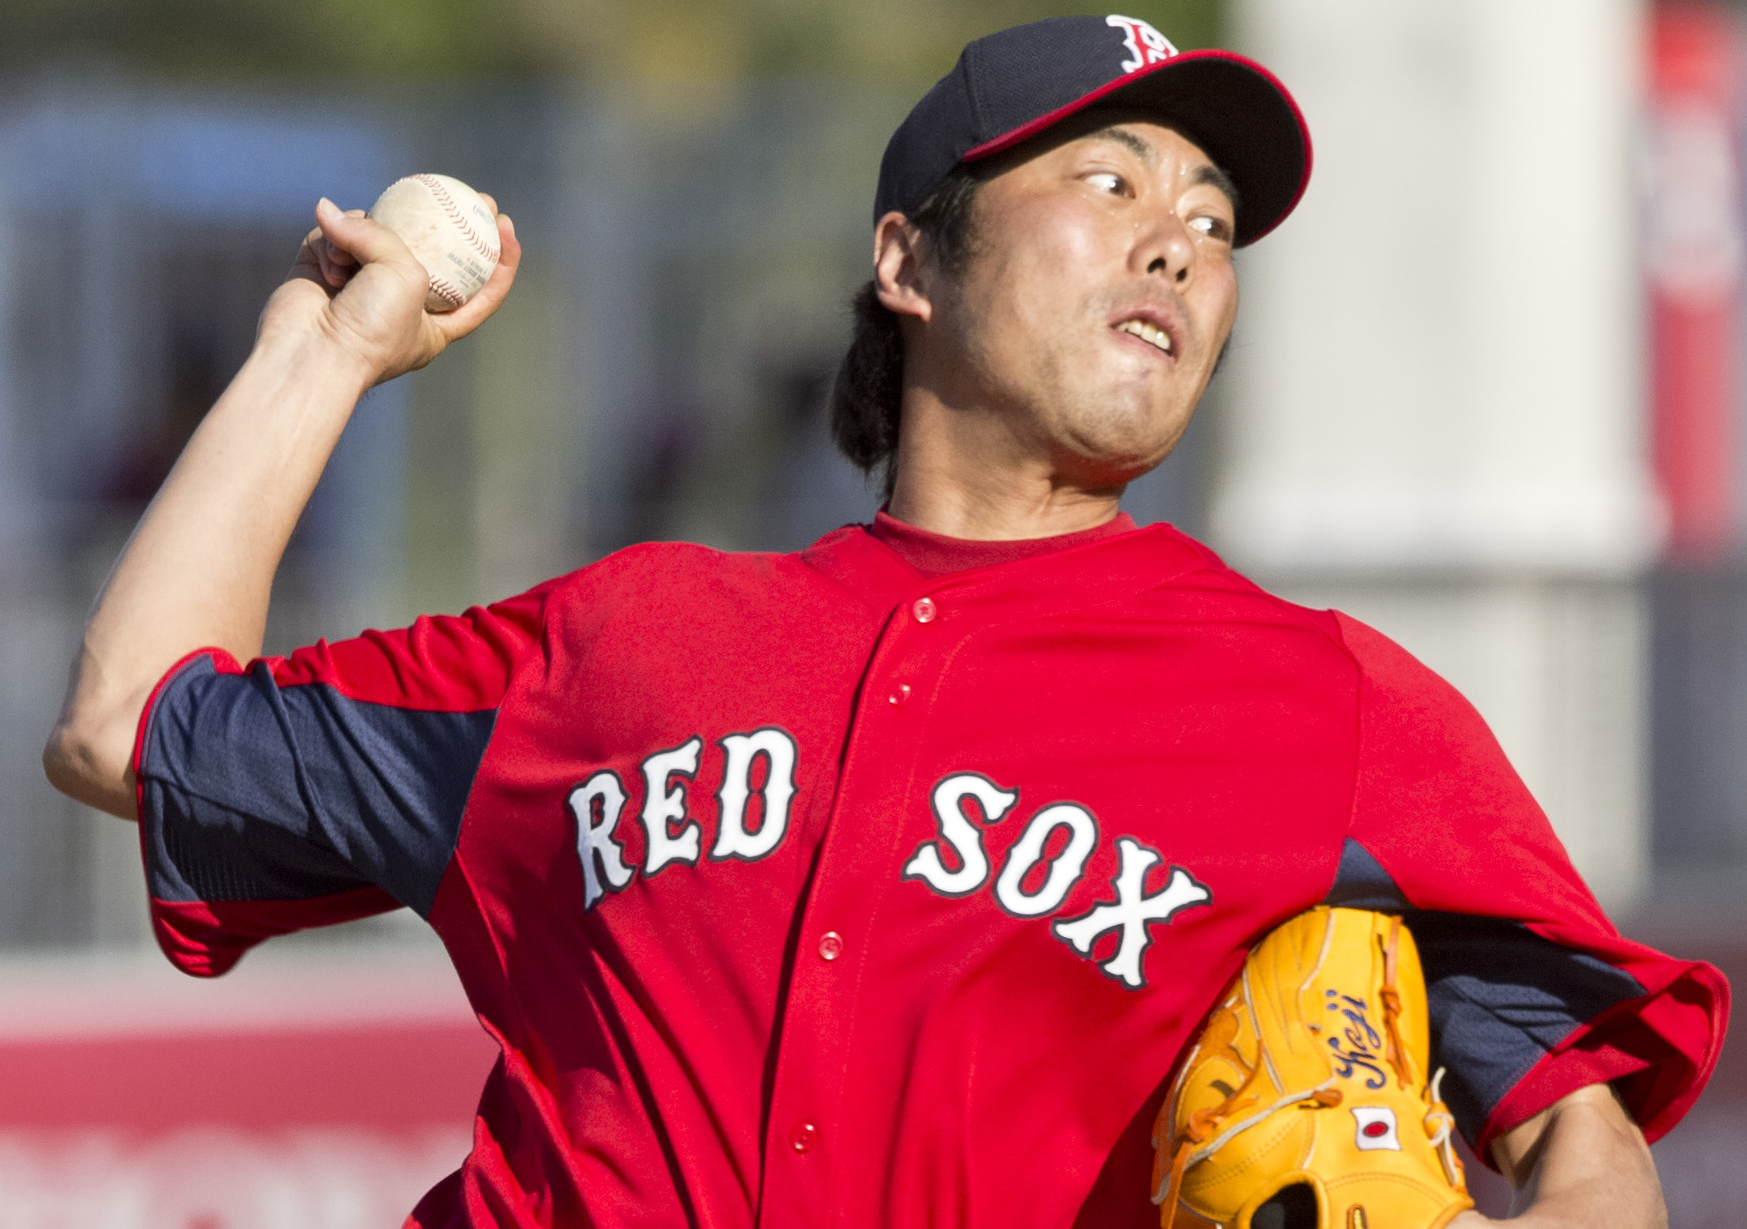 Red Sox: Boston has a Japanese flavor on the mound